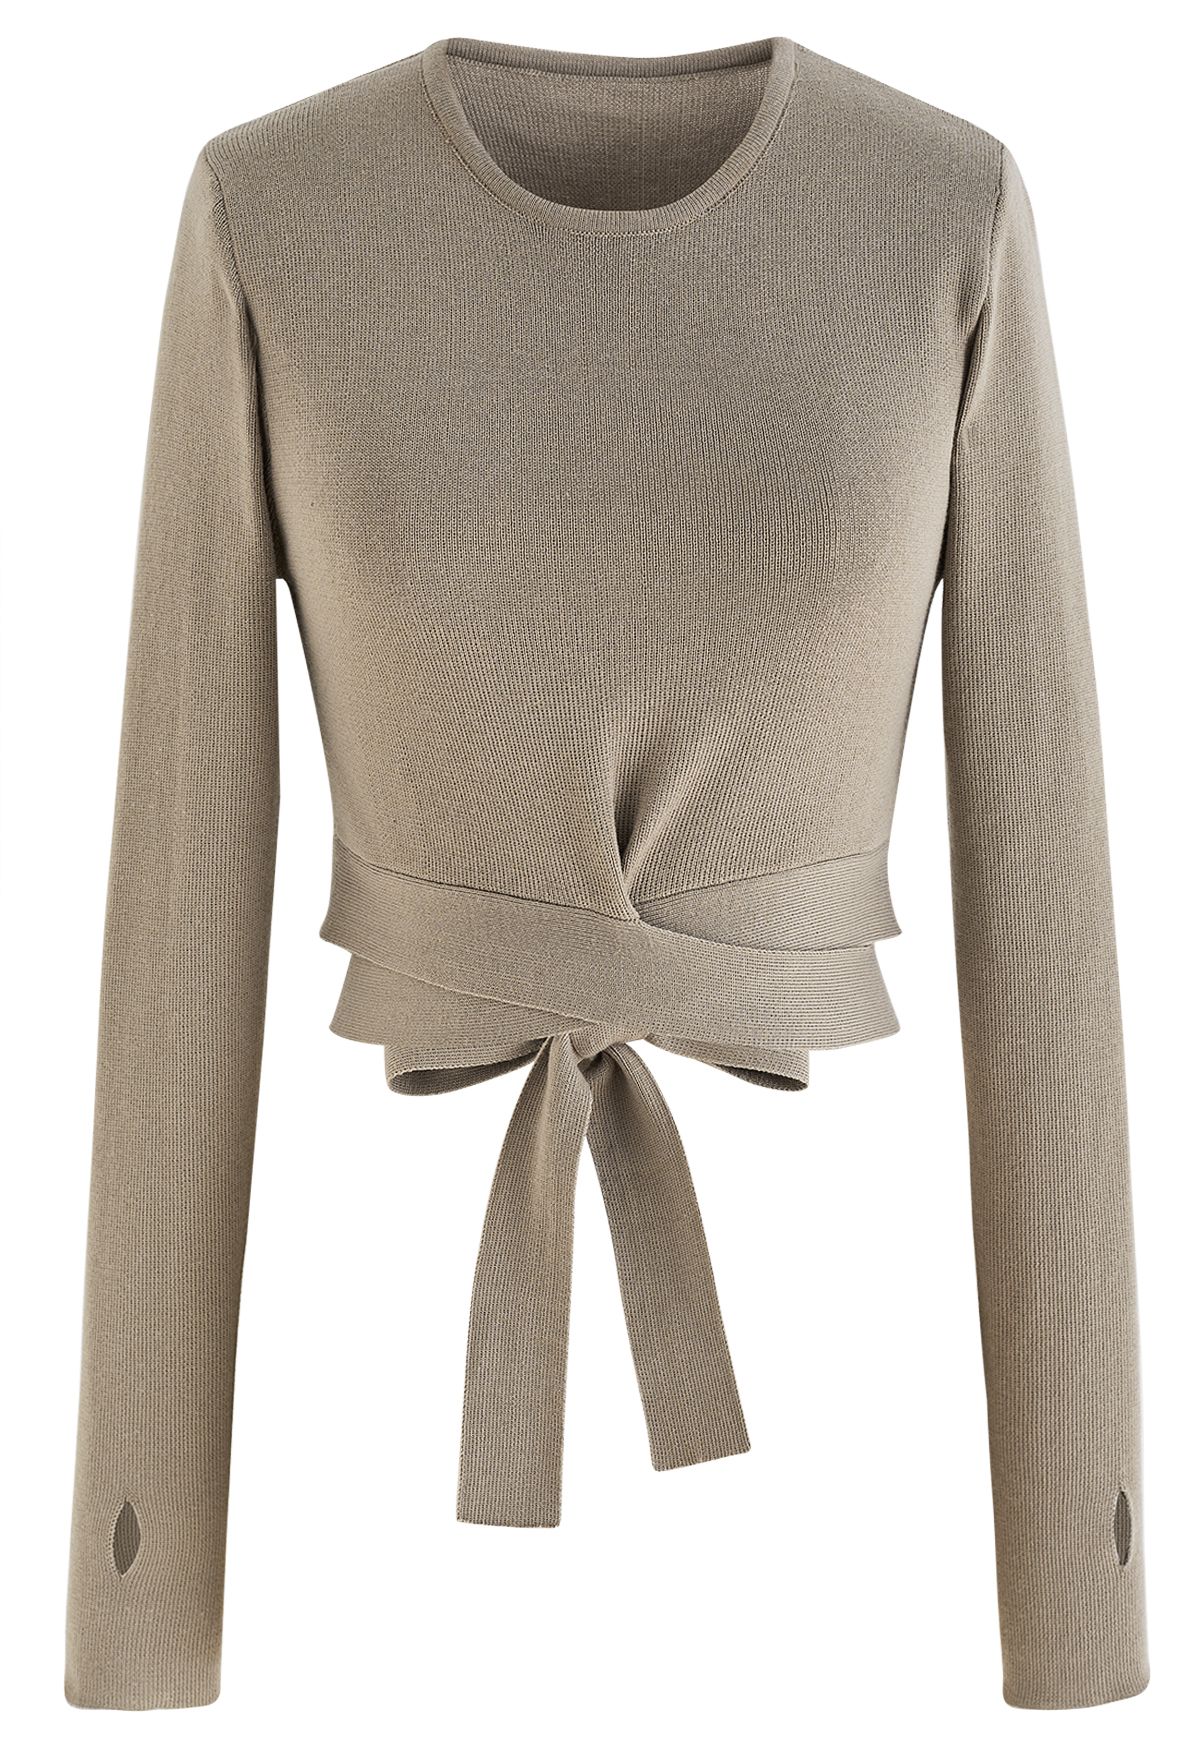 Selbstbindendes Crop-Top mit Bowknot-Strick in Taupe